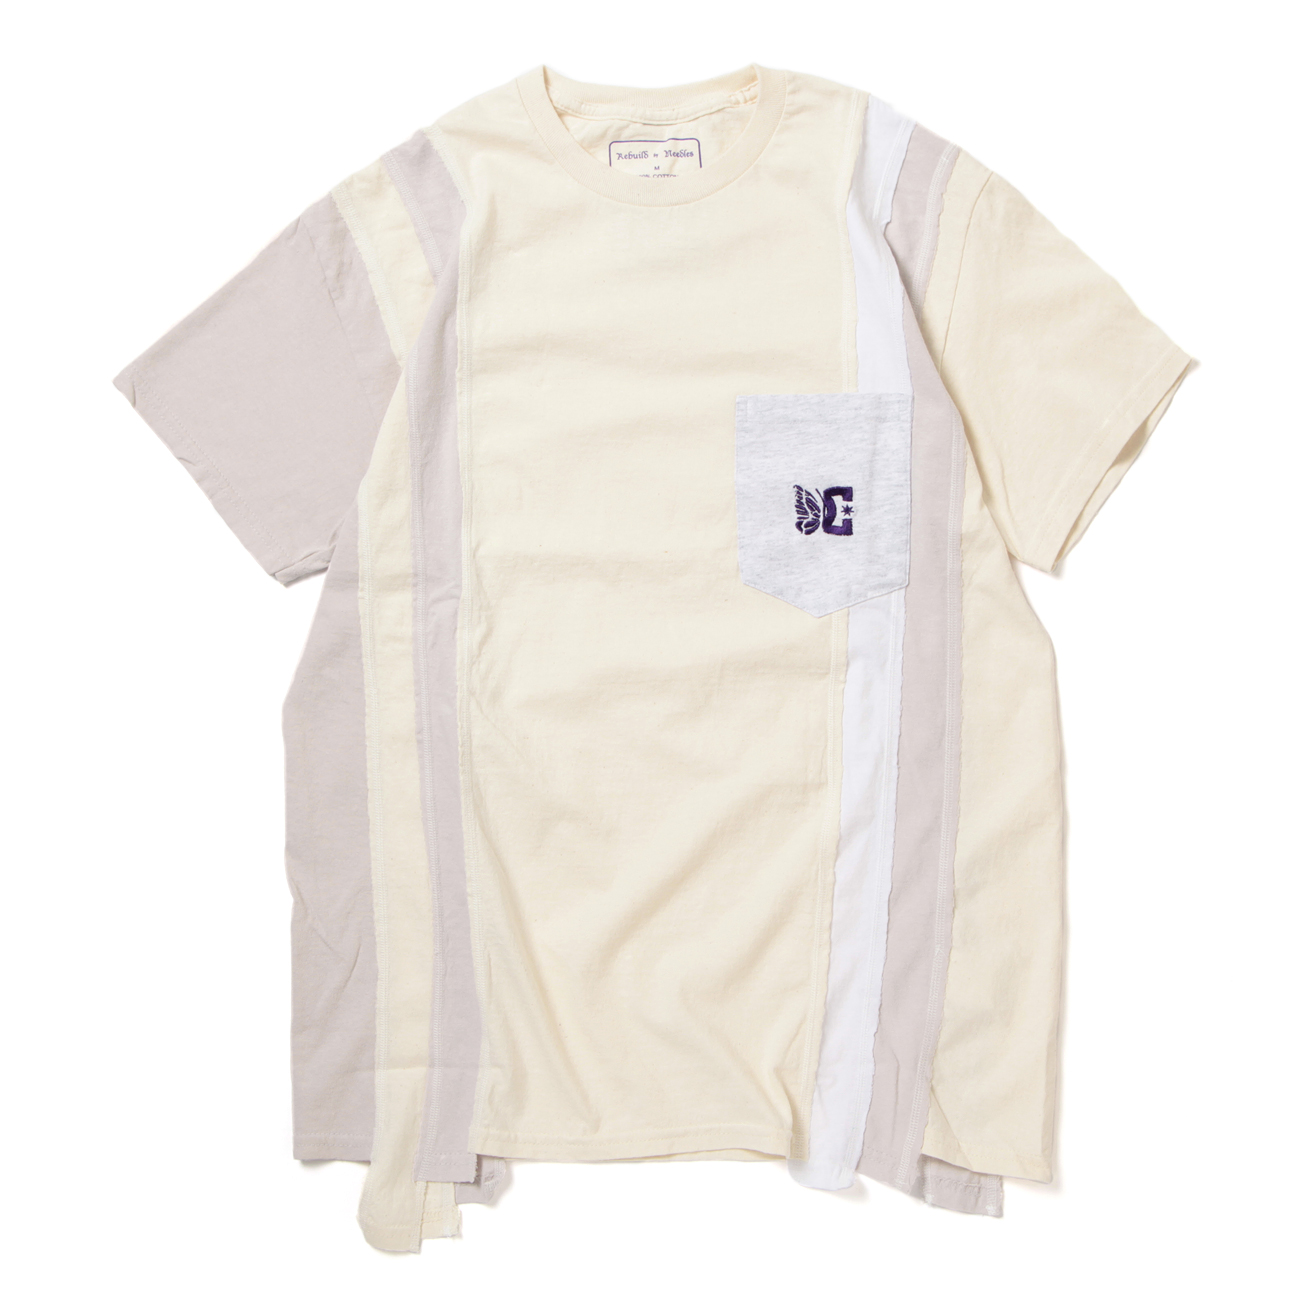 Needles × DC SHOES 7 Cuts S/S Tee - Solid / Fade - Ivory